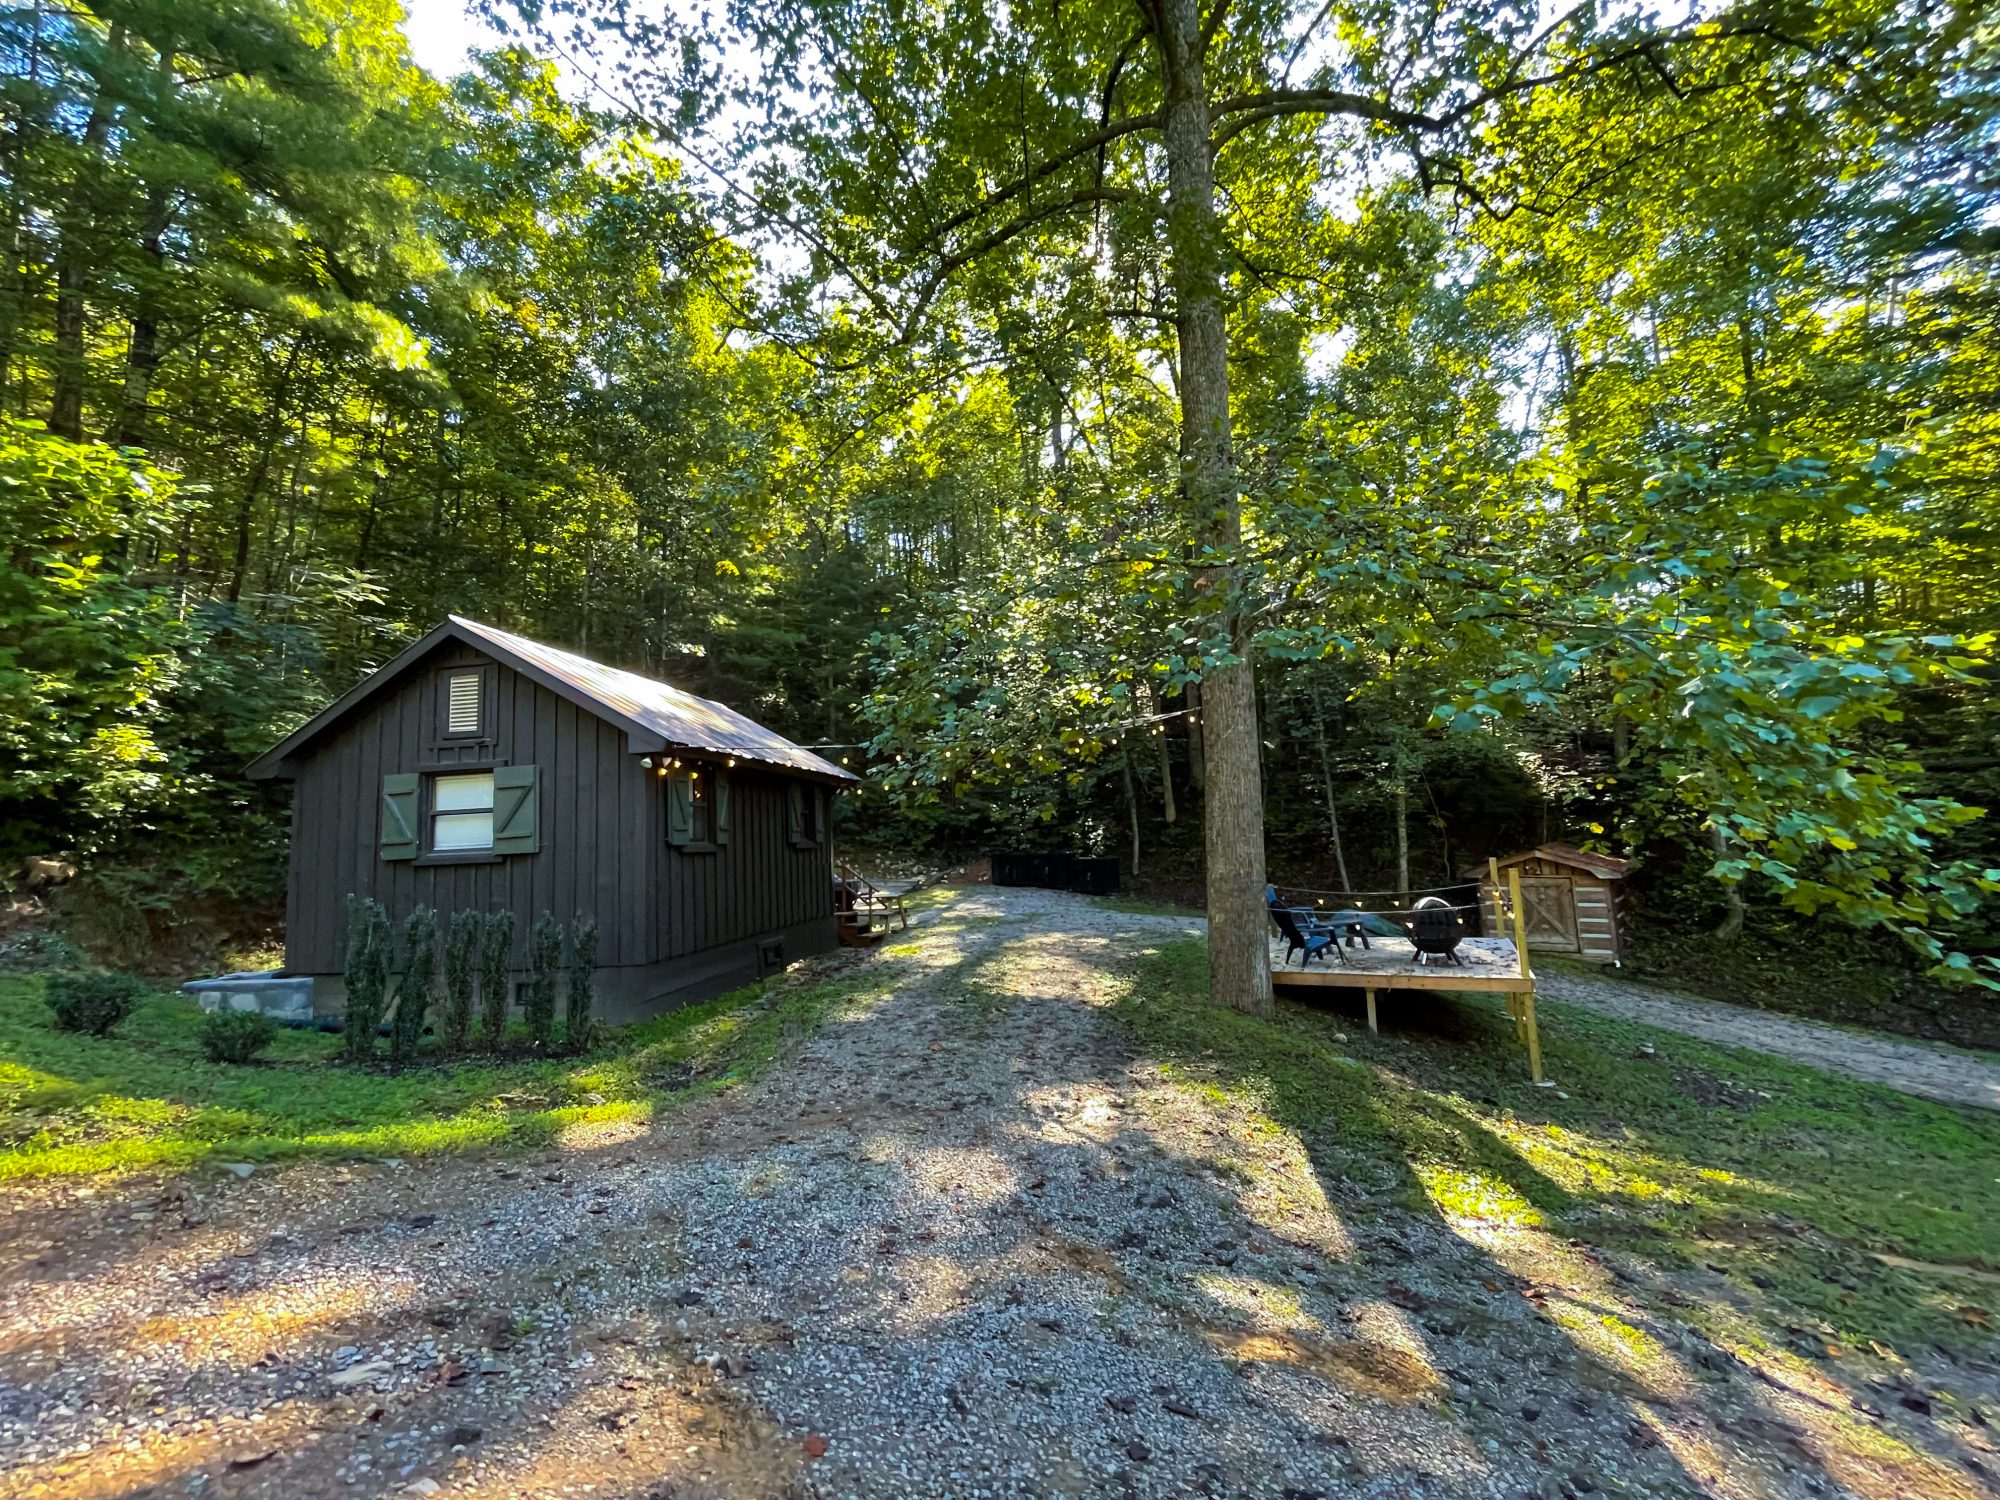 Sly Fox Hollow Tiny Cabin Rental in Smoky Mountains